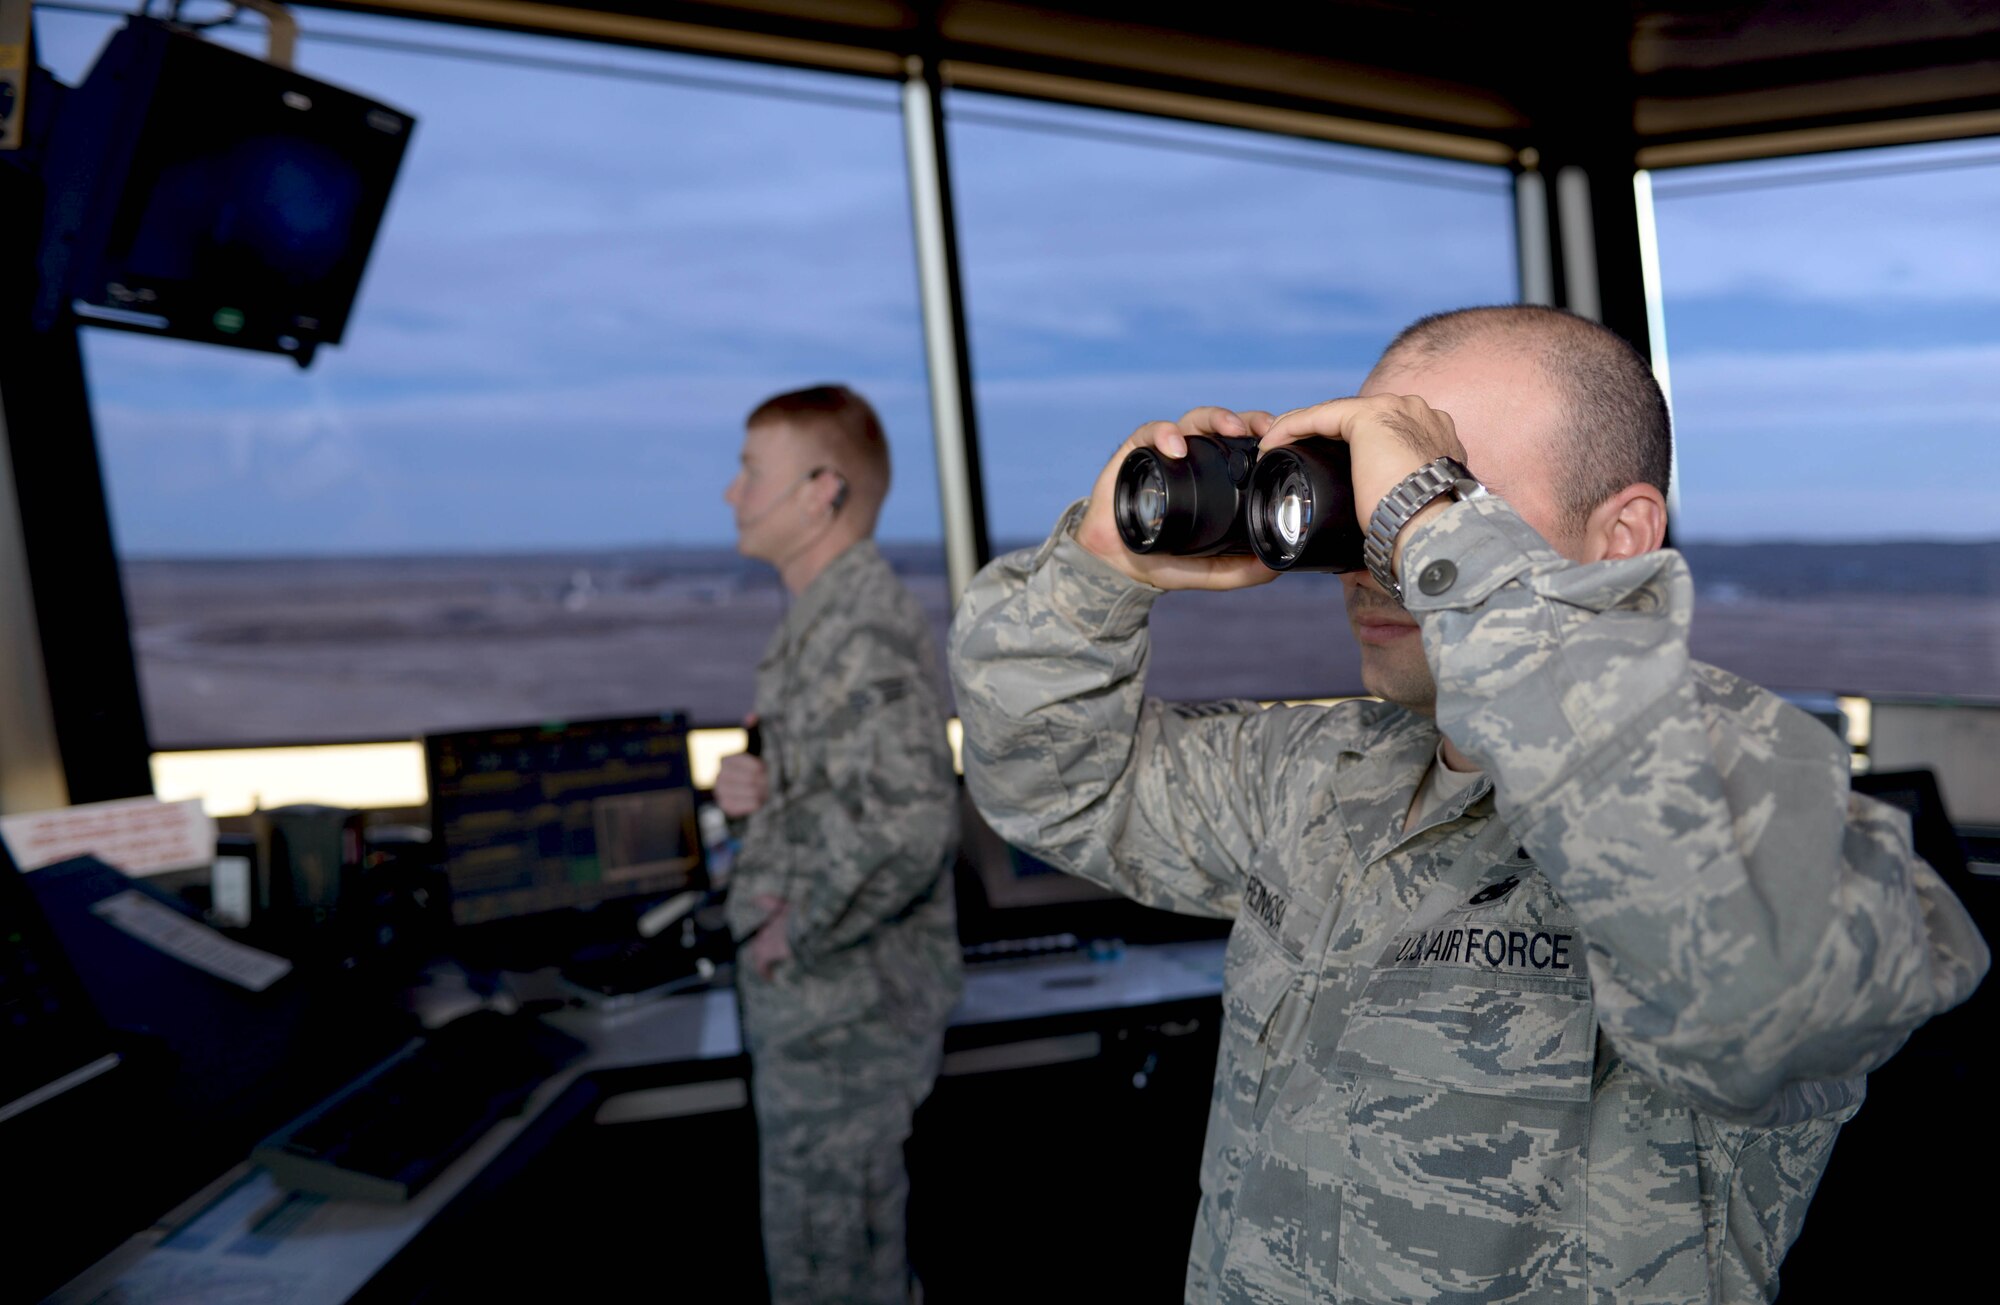 Staff Sgt. Yoendri Reinosa and Senior Airman Clinton Bruce, air traffic controllers assigned to the 28th Operations Support Squadron, watch as a B-1 bomber takes off at Ellsworth Air Force Base, S.D., Nov. 16, 2016. Basic duties of air traffic controllers include clearing aircraft, clearance deliveries and ensuring flight safety. (U.S. Air Force photo by Airman 1st Class Donald C. Knechtel)

